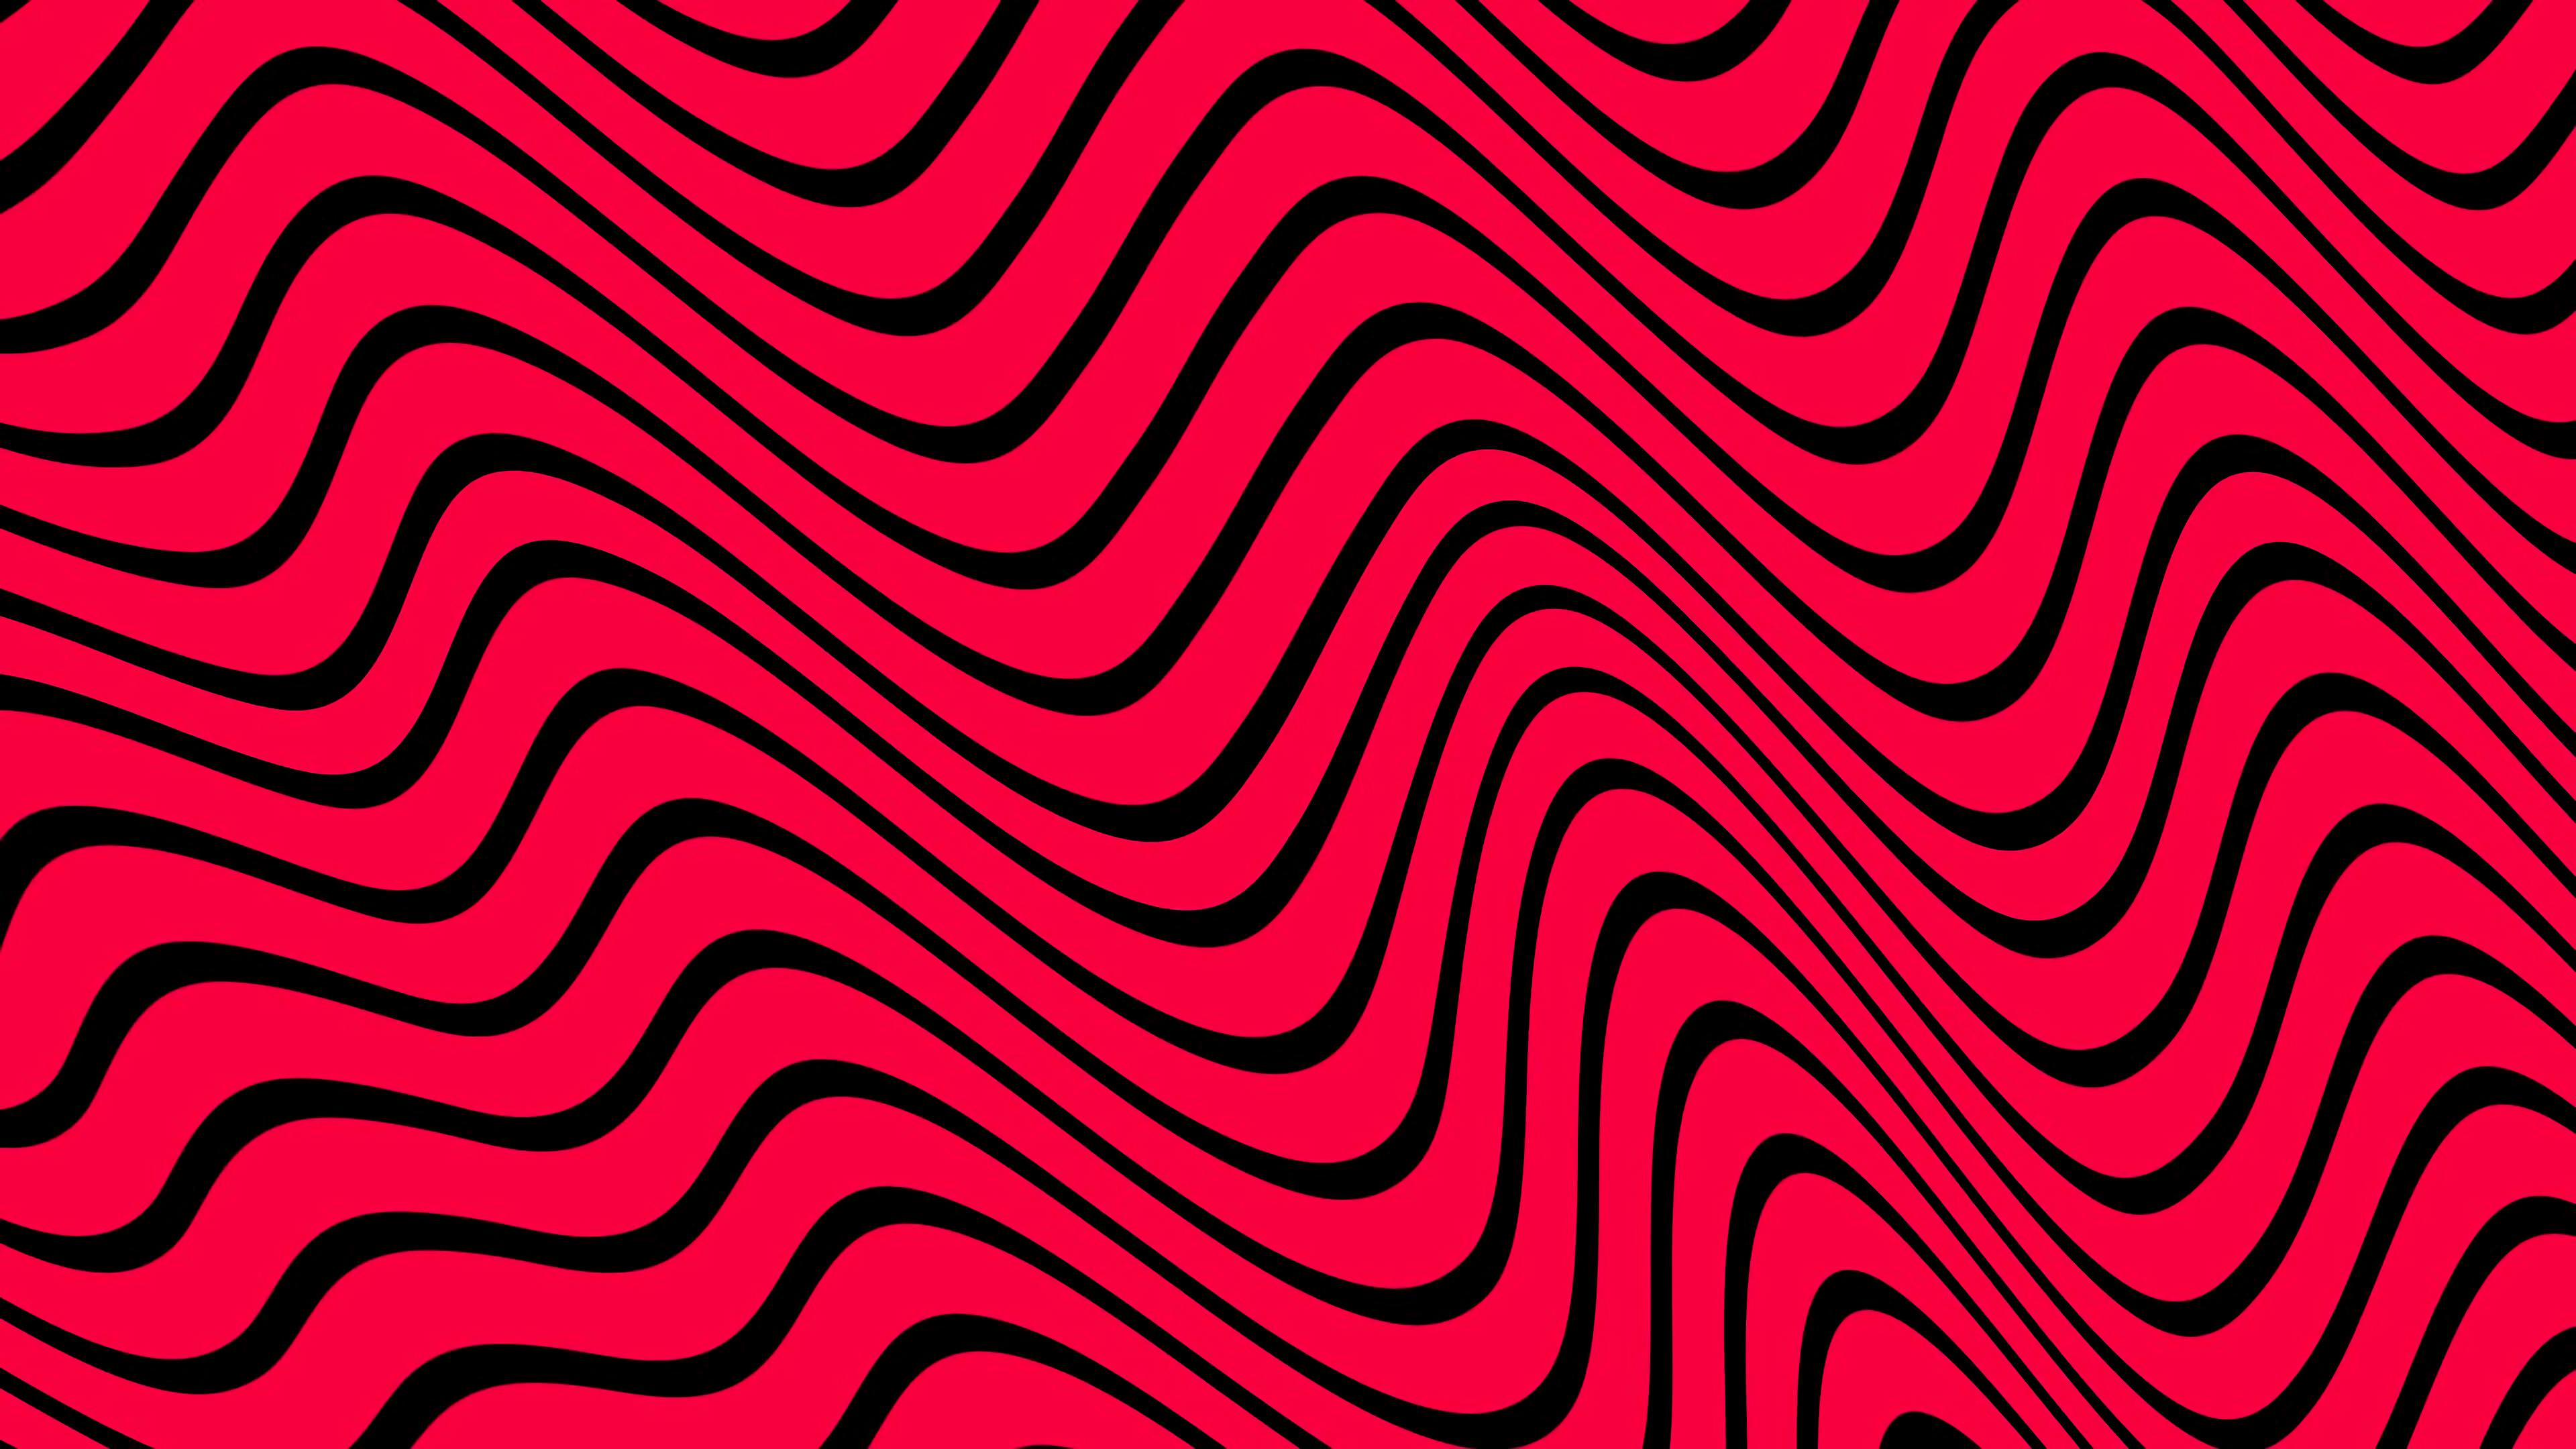 I made this PewDiePie's wavy background! You can use it to your videos, picture, and use it as a desktop wallpaper. Hope you like it! :)